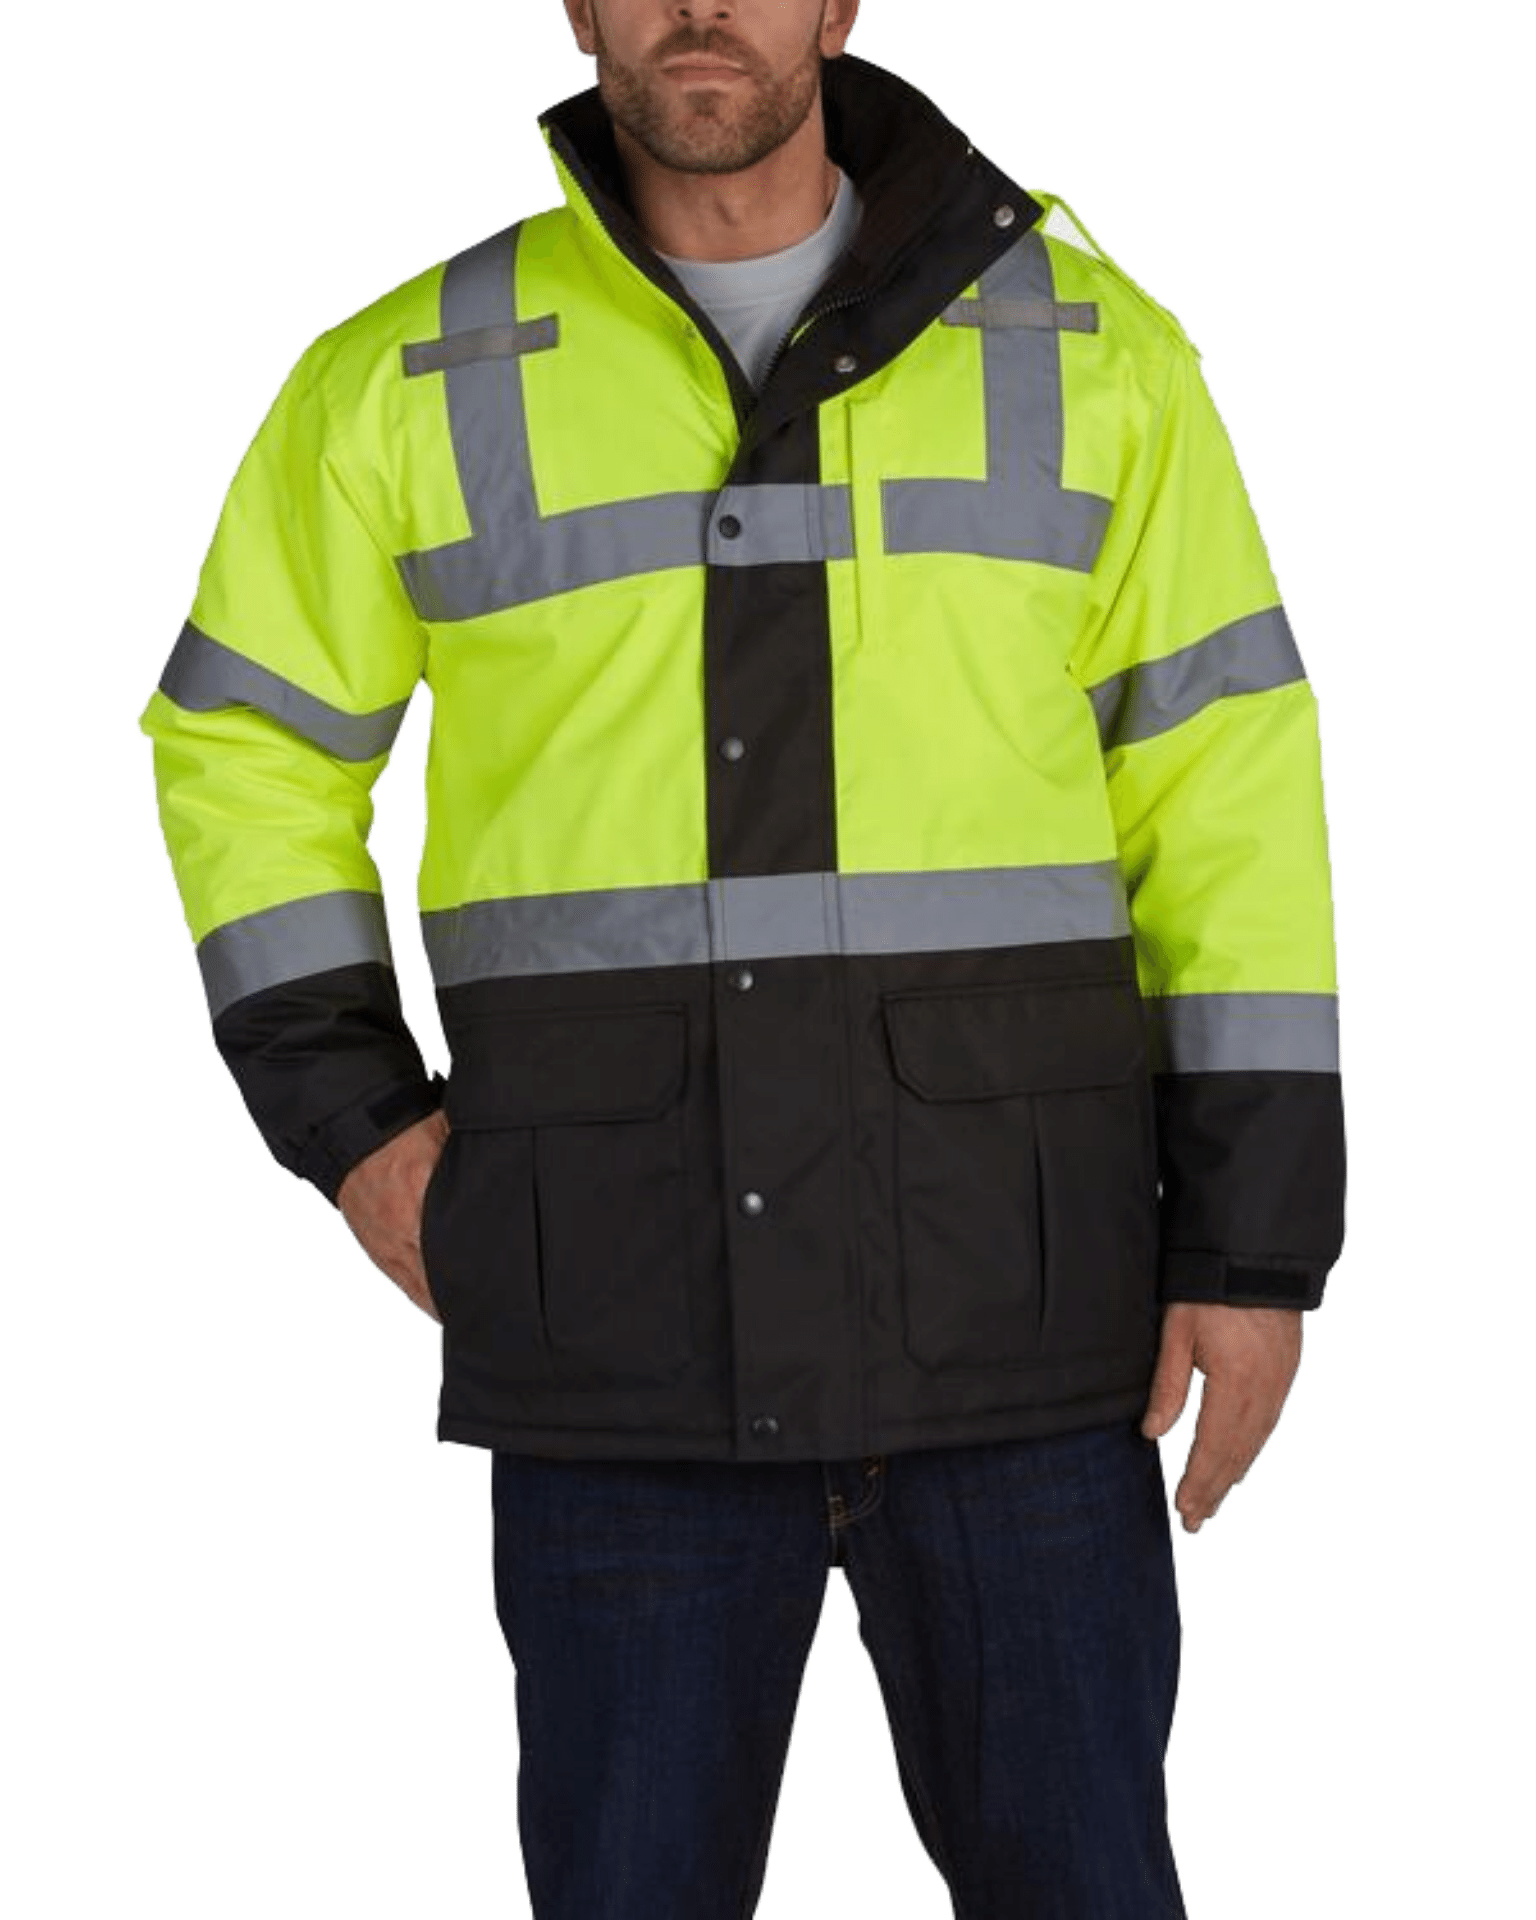 ANSI Class 3 High Visibility Contractor Jacket for men with Teflon Fabric Protector by Utility Pro